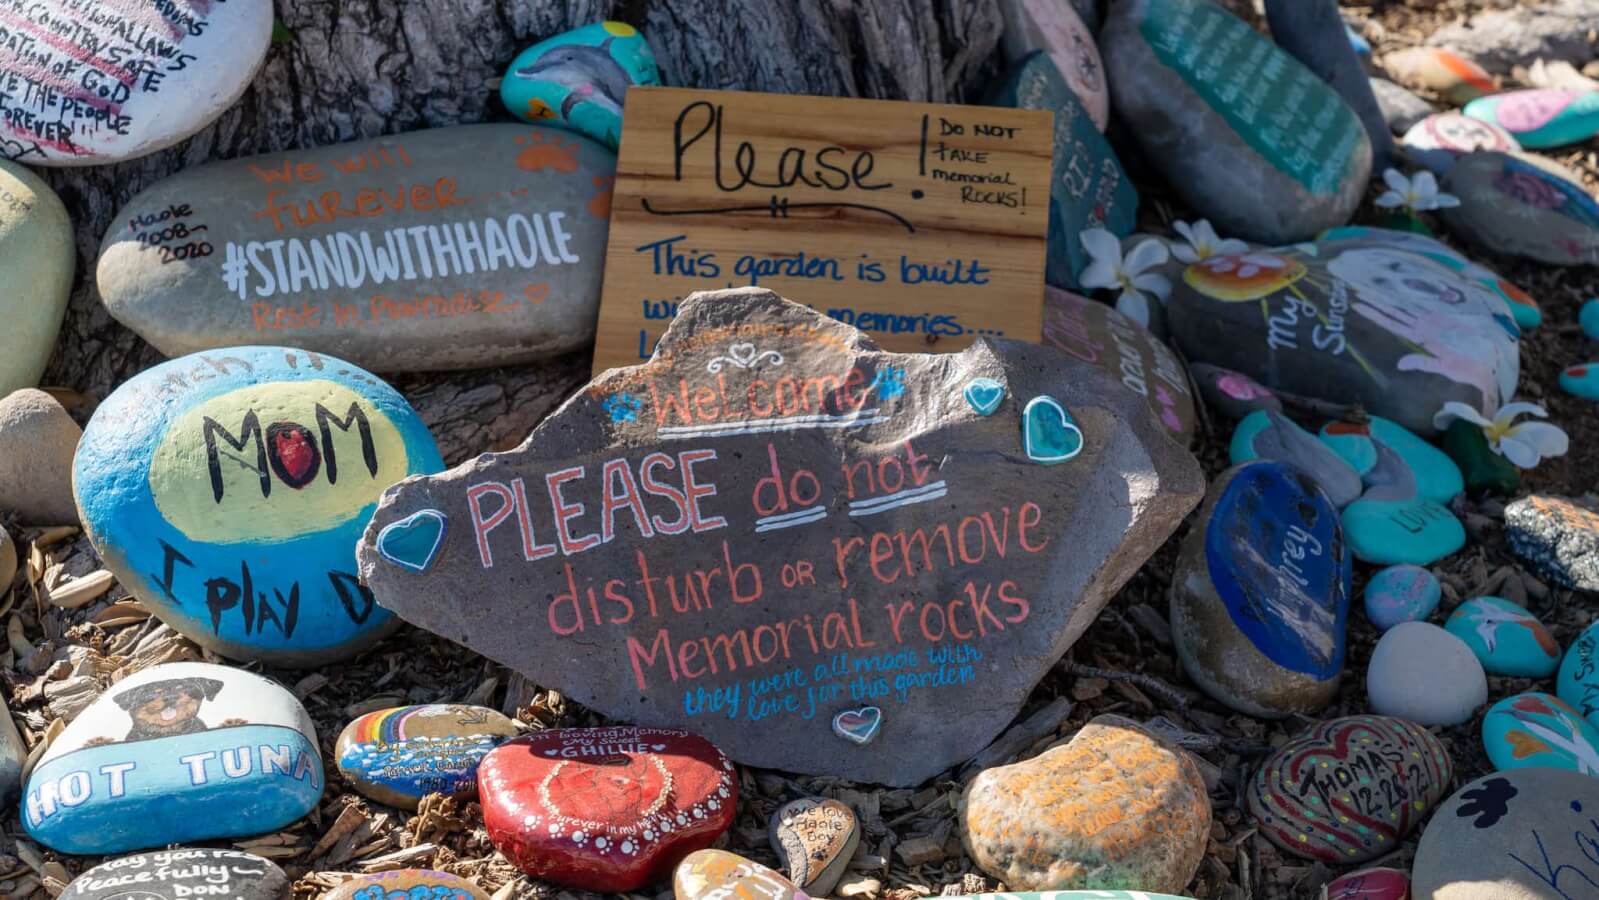 Haole’s Rock Garden in Ventura Tells a Story of Everything Right